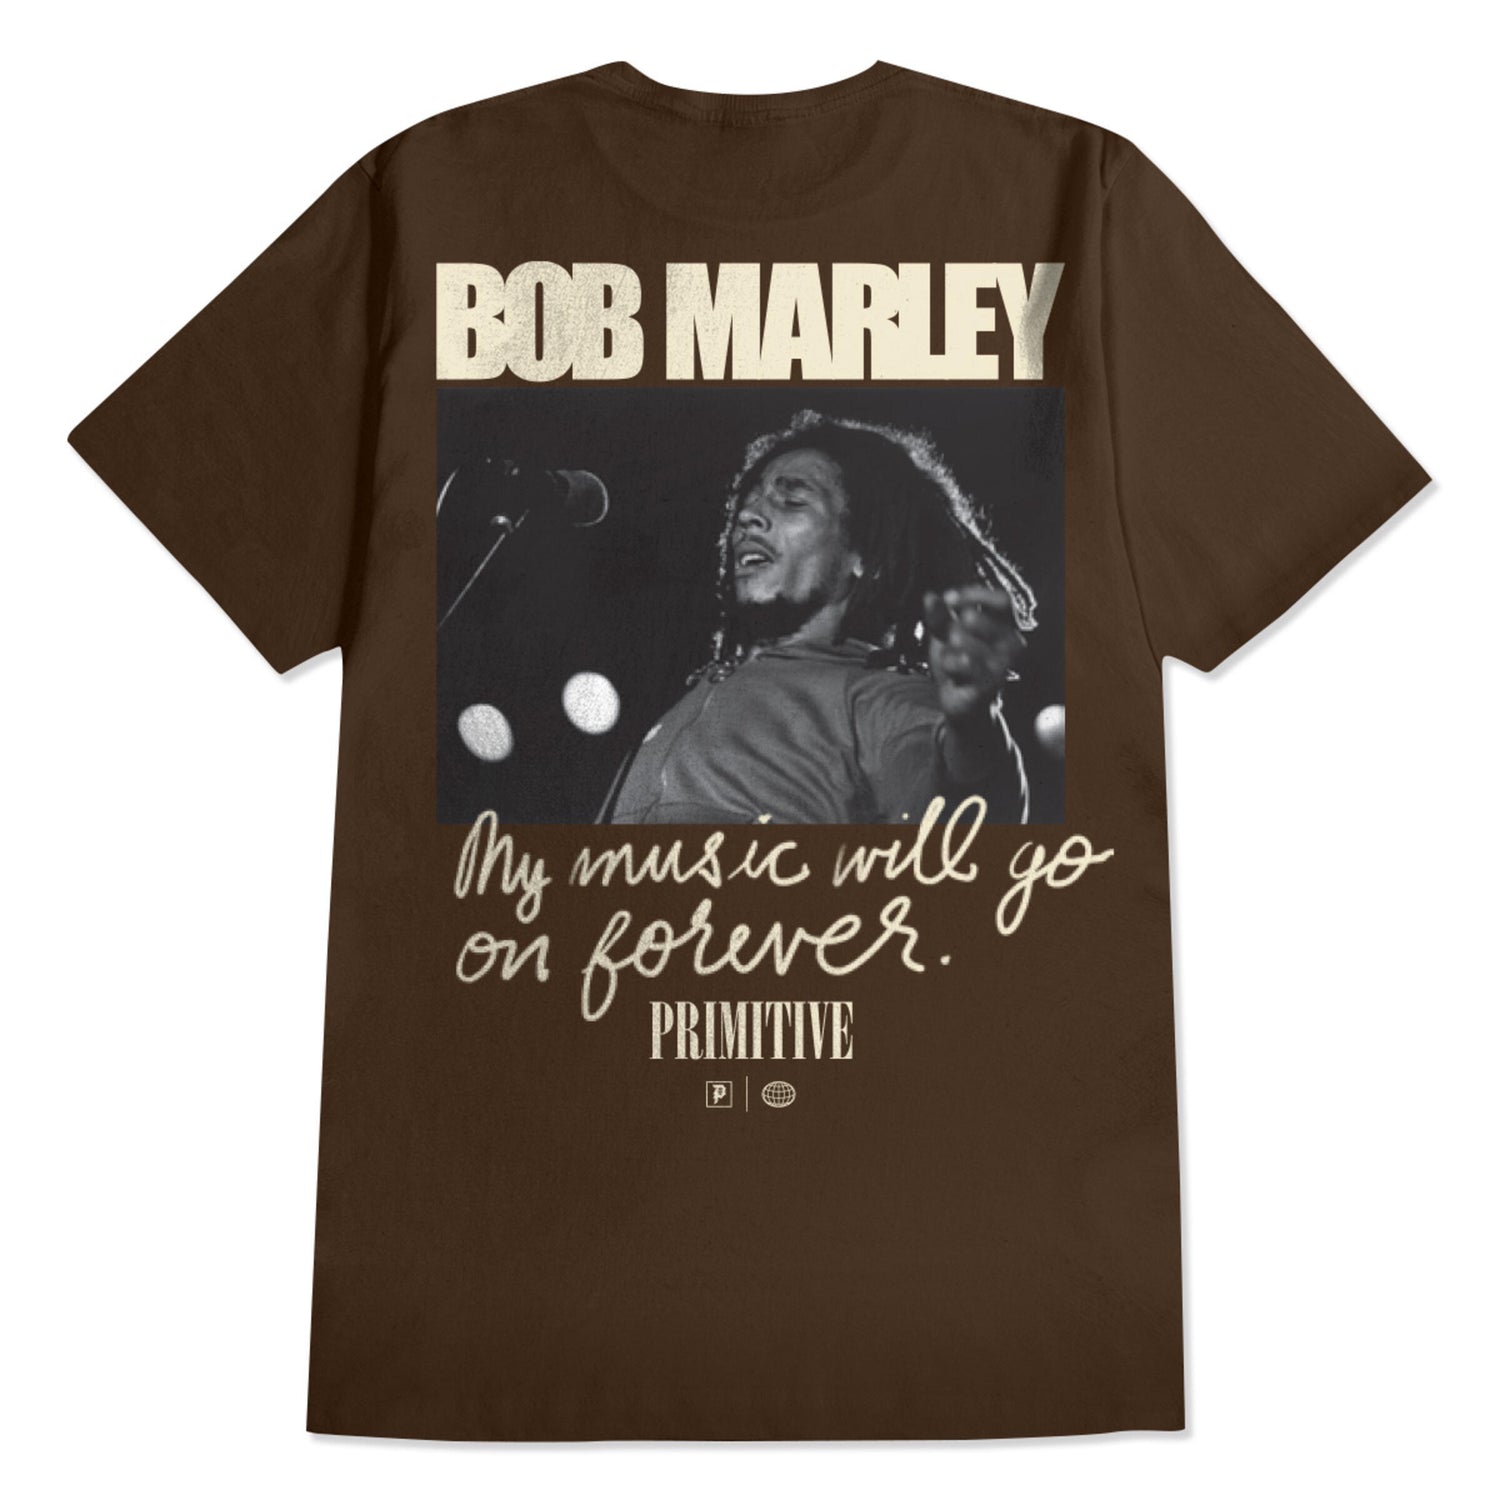 Primitive x Bob Marley Forever Tee - Brown